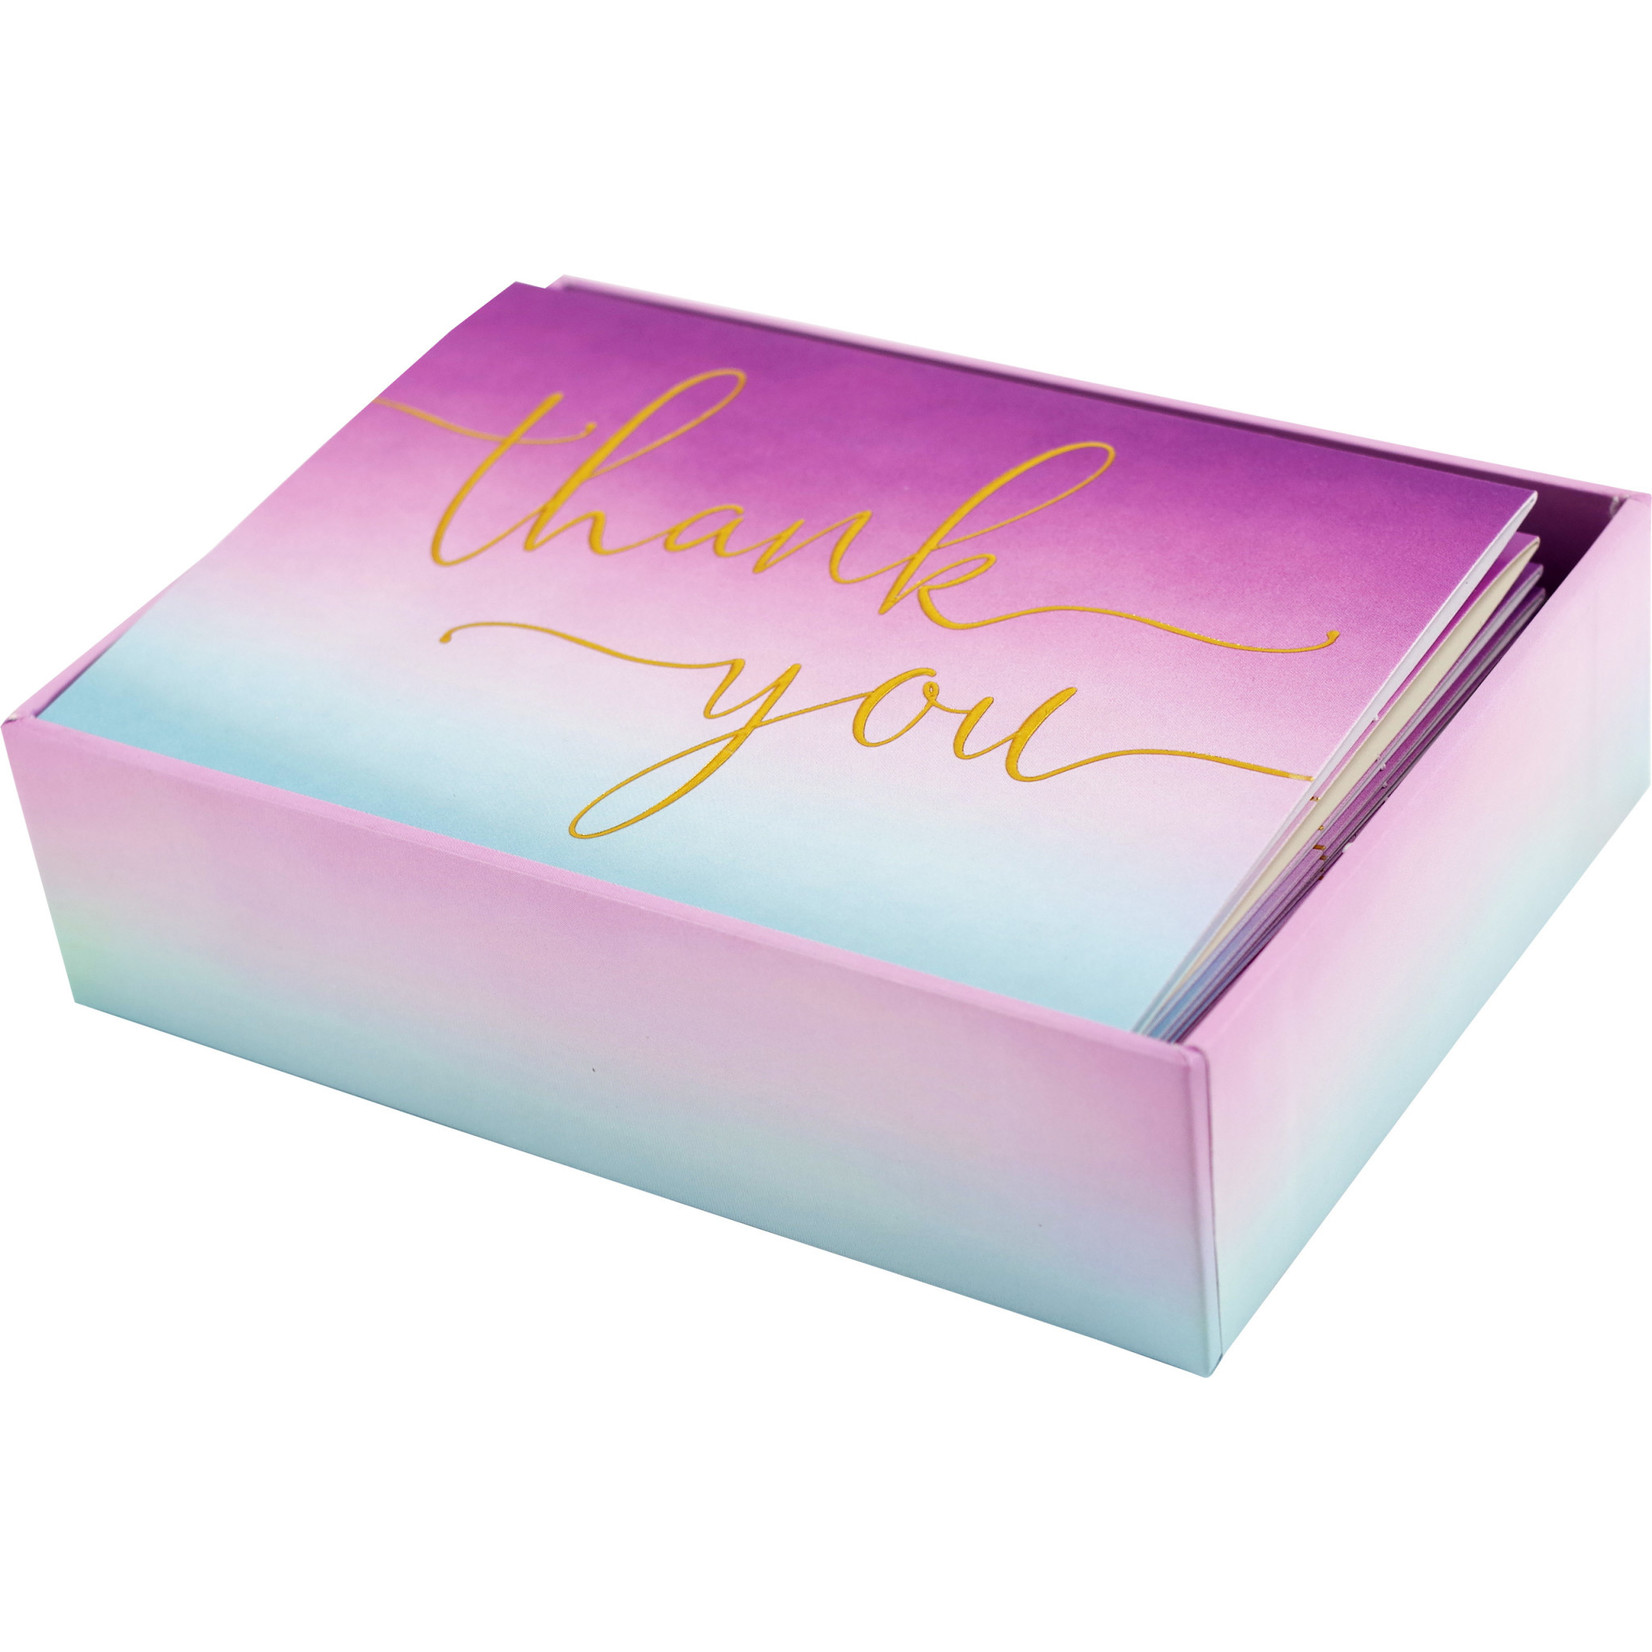 Peter Pauper Press Boxed Thank You Cards: Amethyst